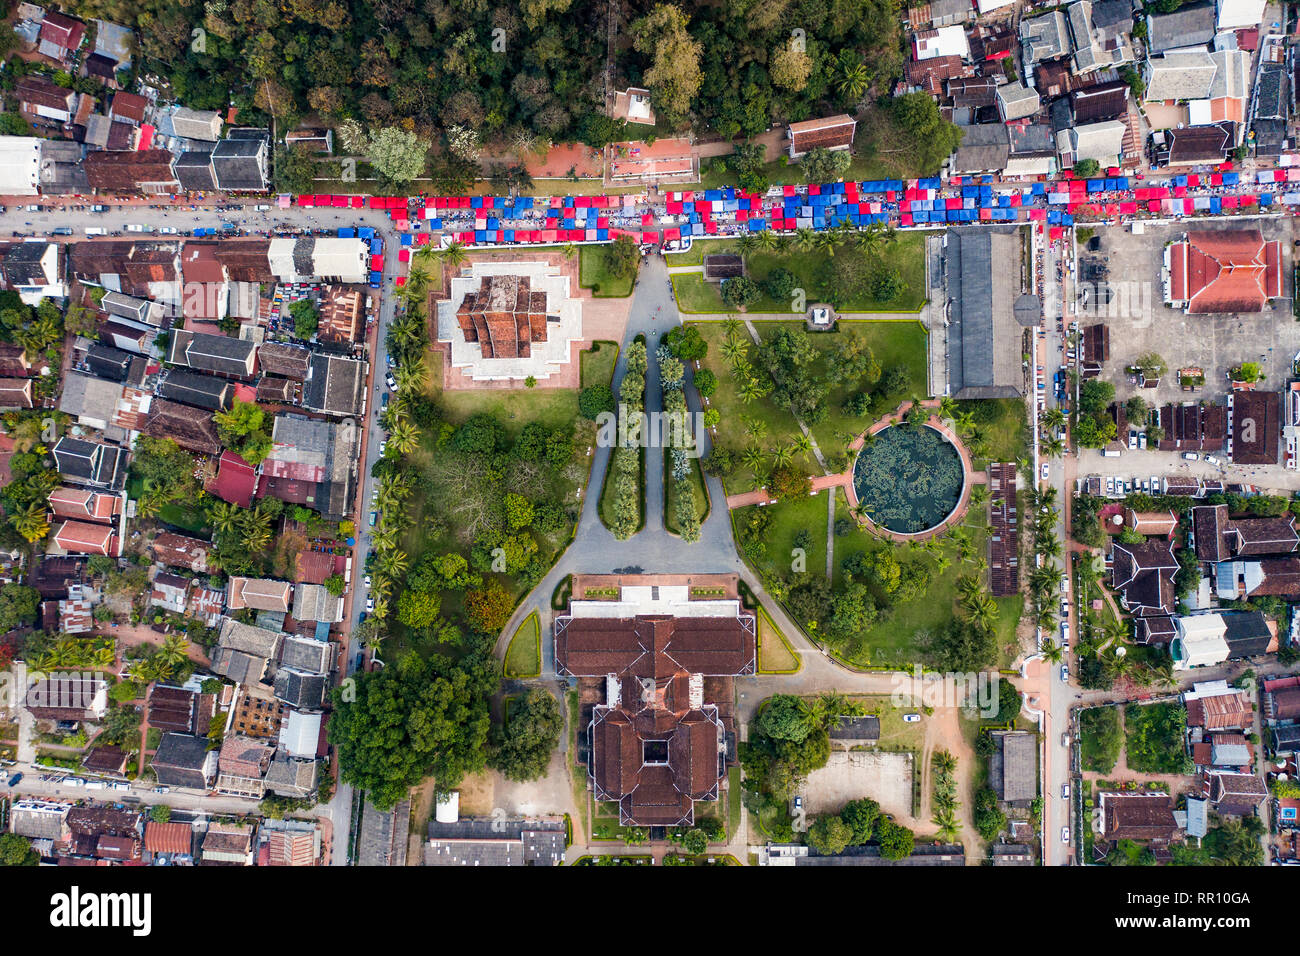 (view from above) Stunning aerial view of the beautiful Haw Pha Bang Temple and the Royal Palace National Museum with colored night market tents. Stock Photo